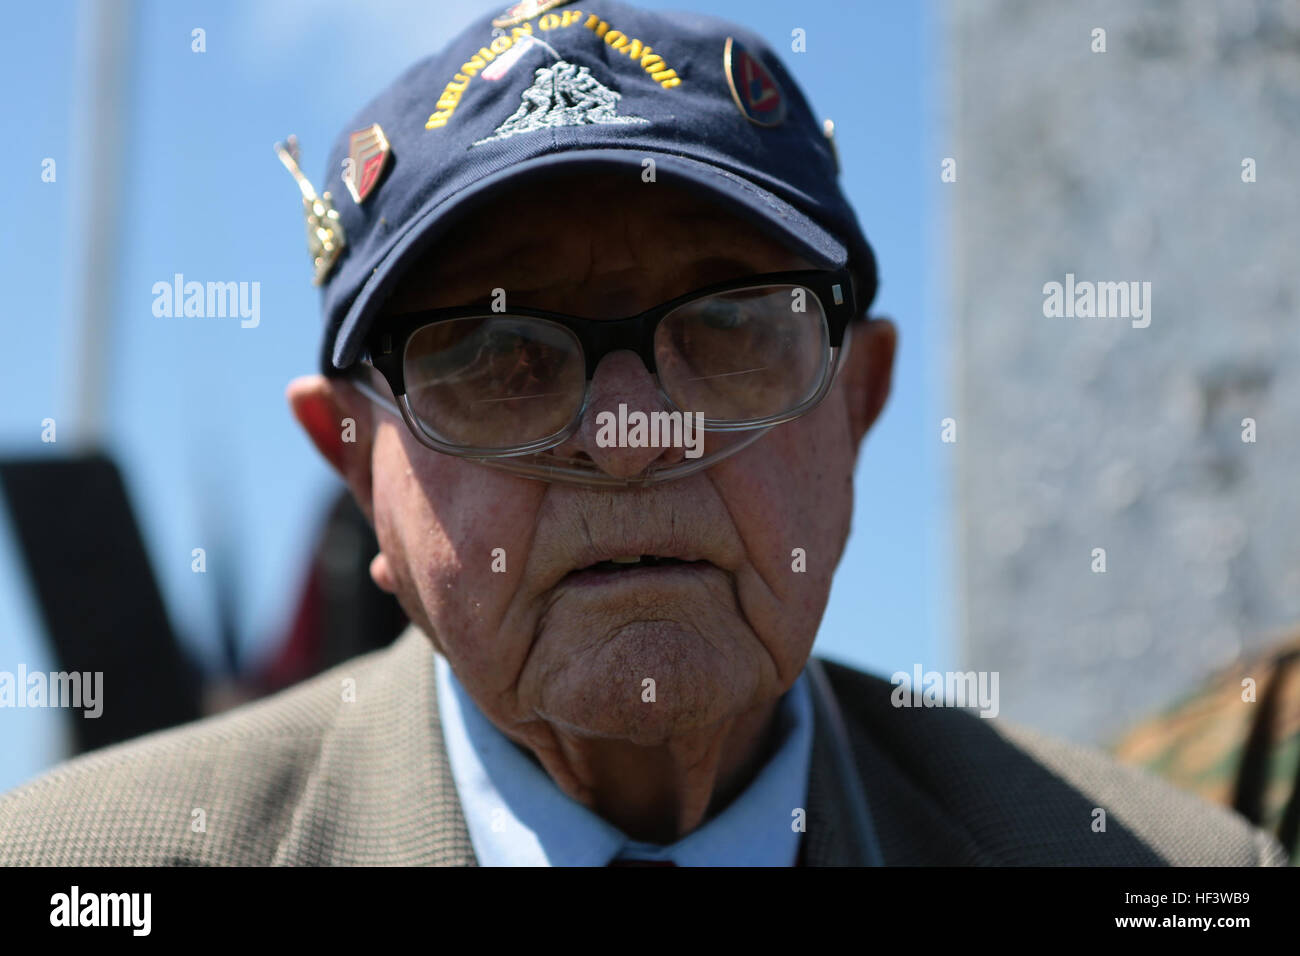 A U.S. Marine Corps veteran of Iwo Jima, Abraham Eutsey, attends the 71st Commemoration of the Battle of Iwo Jima at Iwo To, Japan, March 19, 2016. The Iwo Jima Reunion of Honor is an opportunity for Japanese and U.S. veterans and their families, dignitaries, leaders and service members from both nations to honor the battle while recognizing 71 years of peace and prosperity in the U.S. – Japanese alliance. (U.S. Marine Corps photo by MCIPAC Combat Camera Lance Cpl. Juan Esqueda / Released) Iwo Jima 71st Reunion of Honor 160319-M-JD520-070 Stock Photo